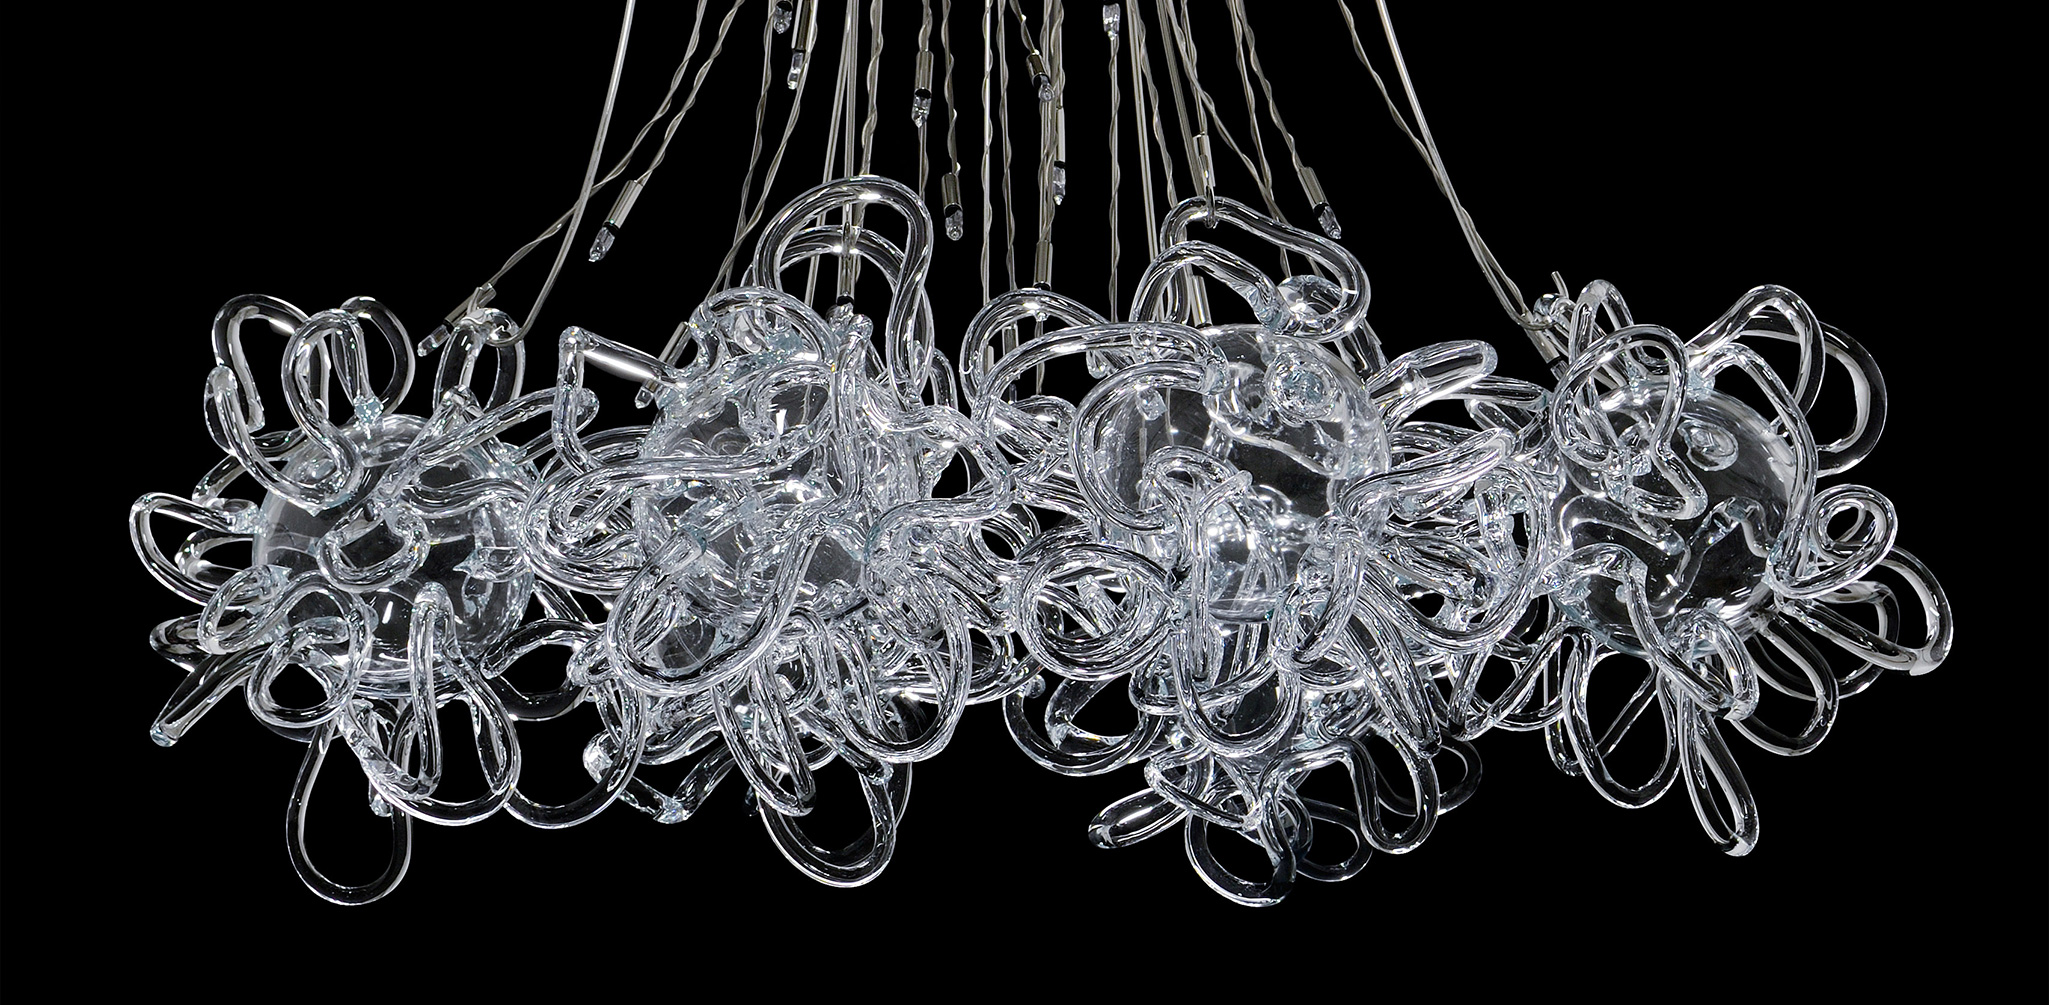 Modern glass and metal chandelier on black background